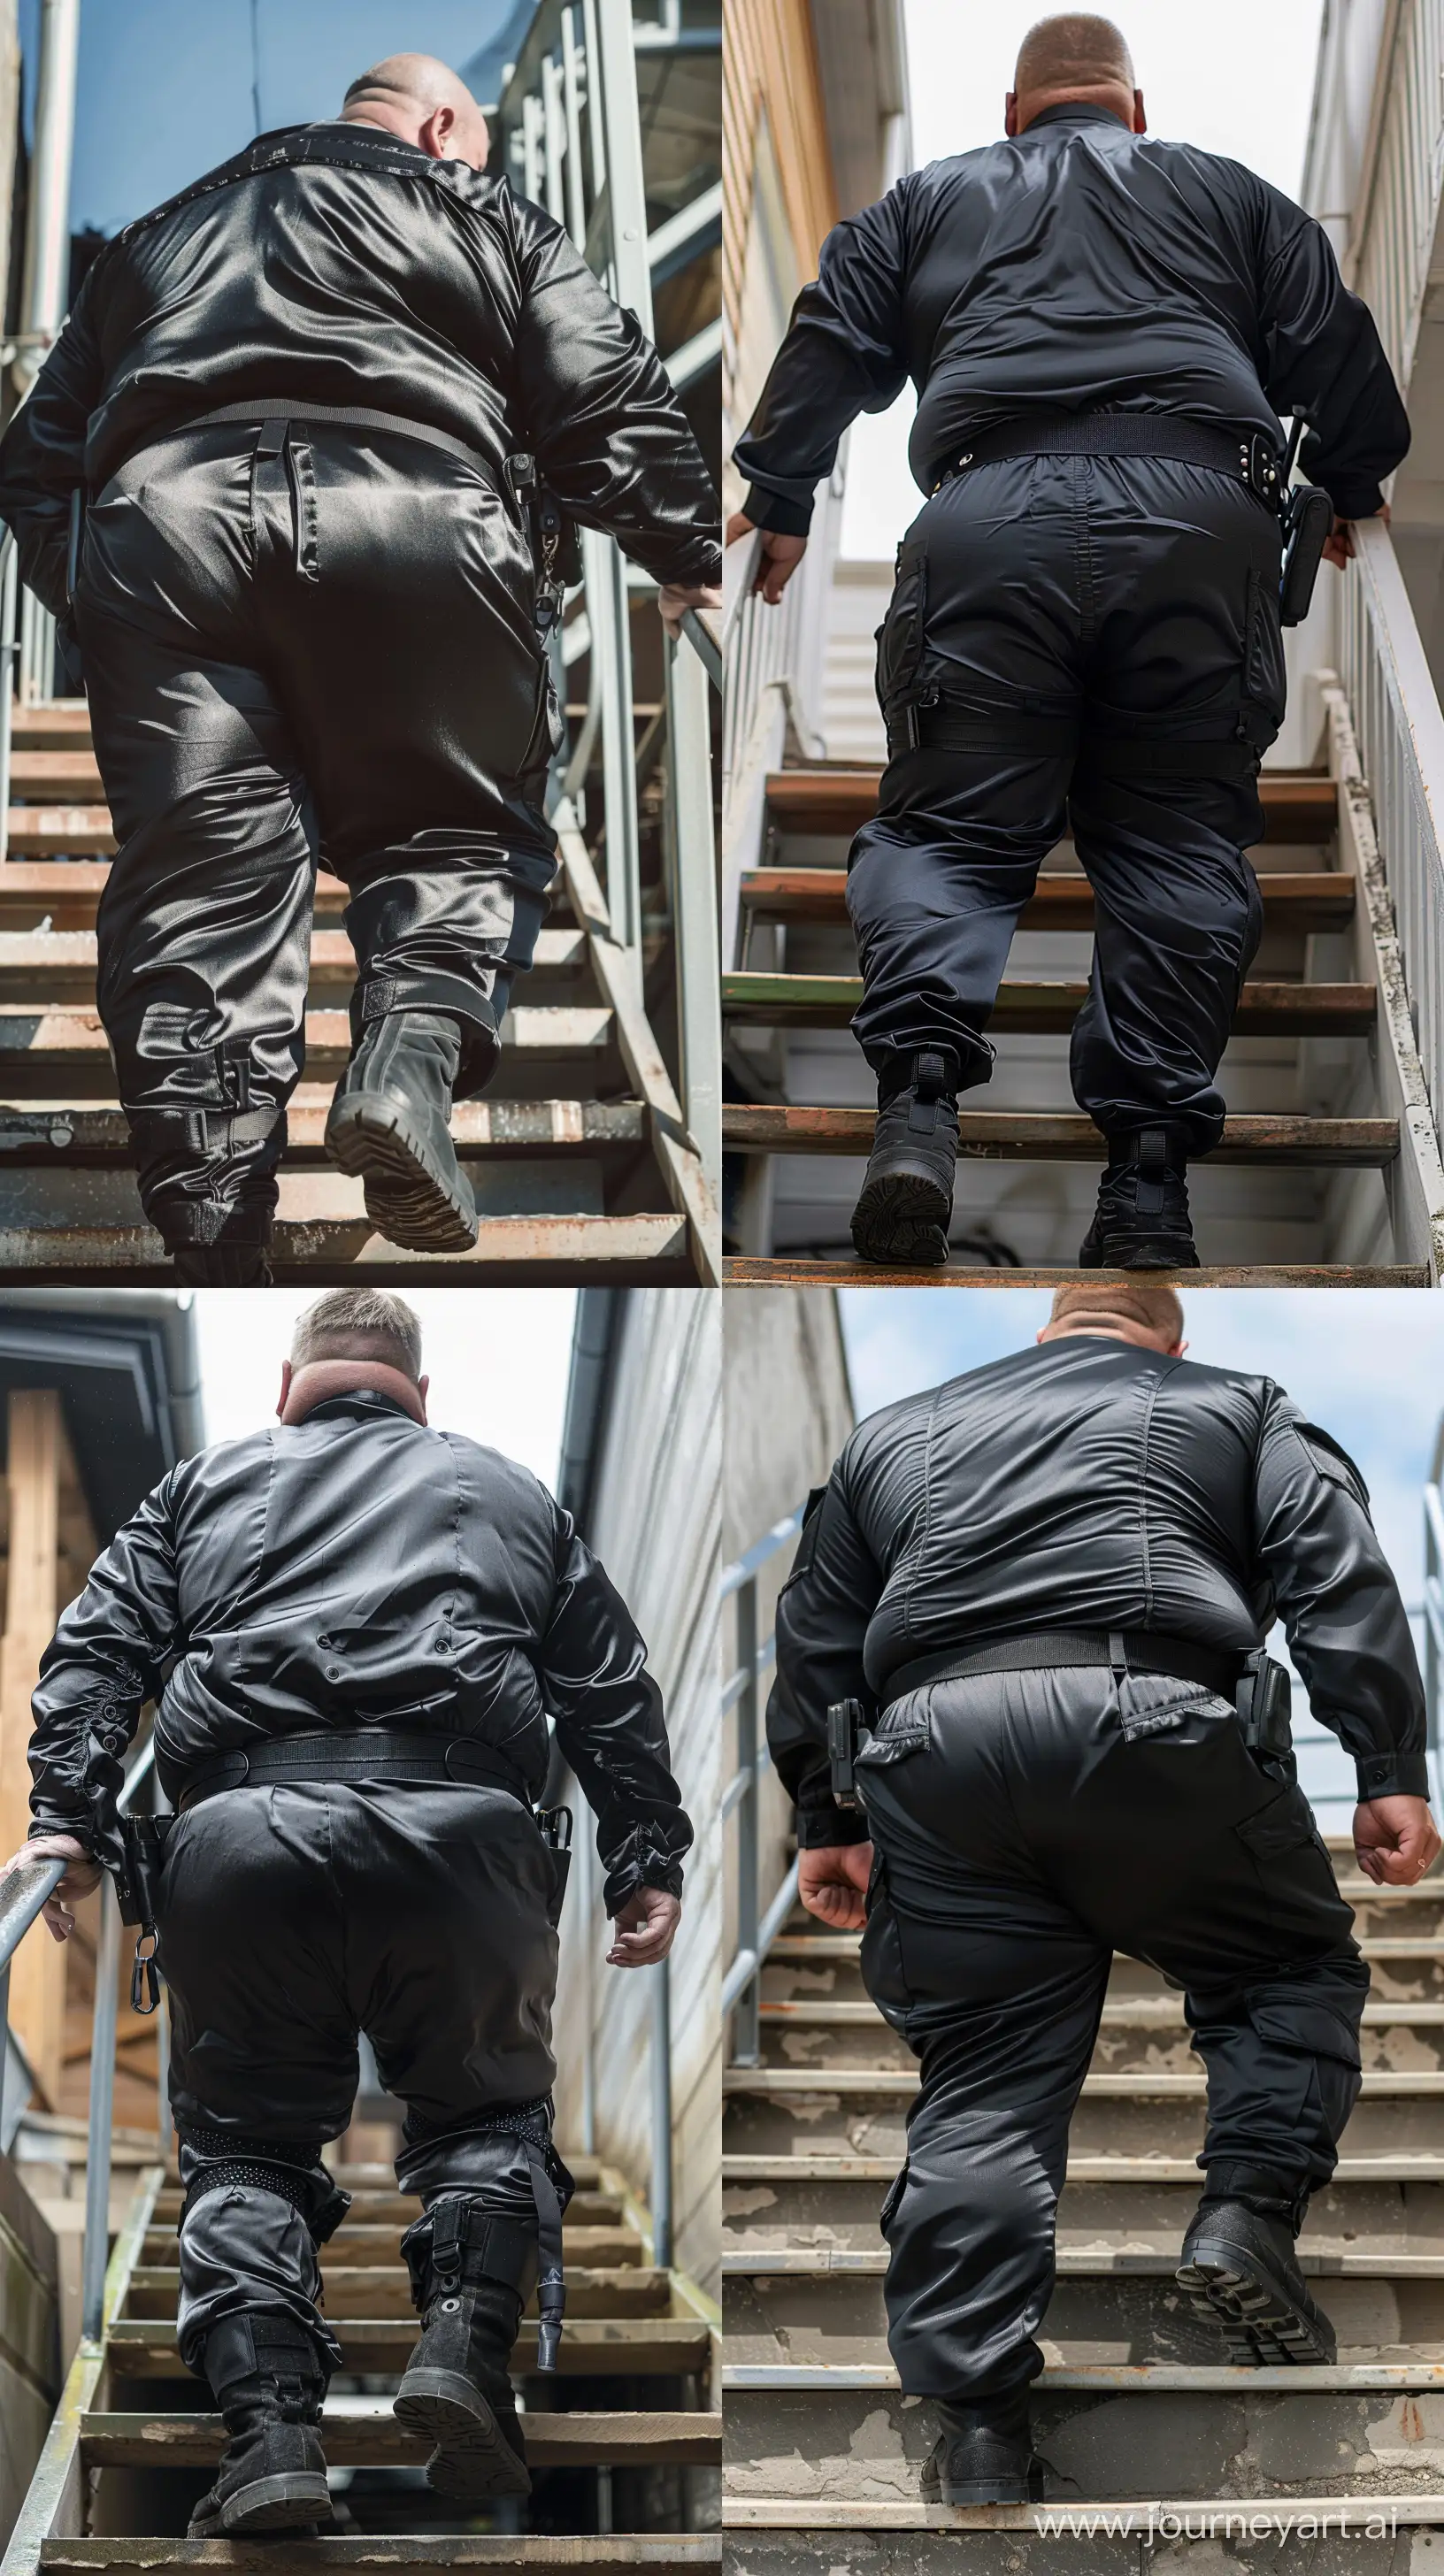 Elderly-Security-Guard-Ascending-Stairs-in-Black-Tactical-Gear